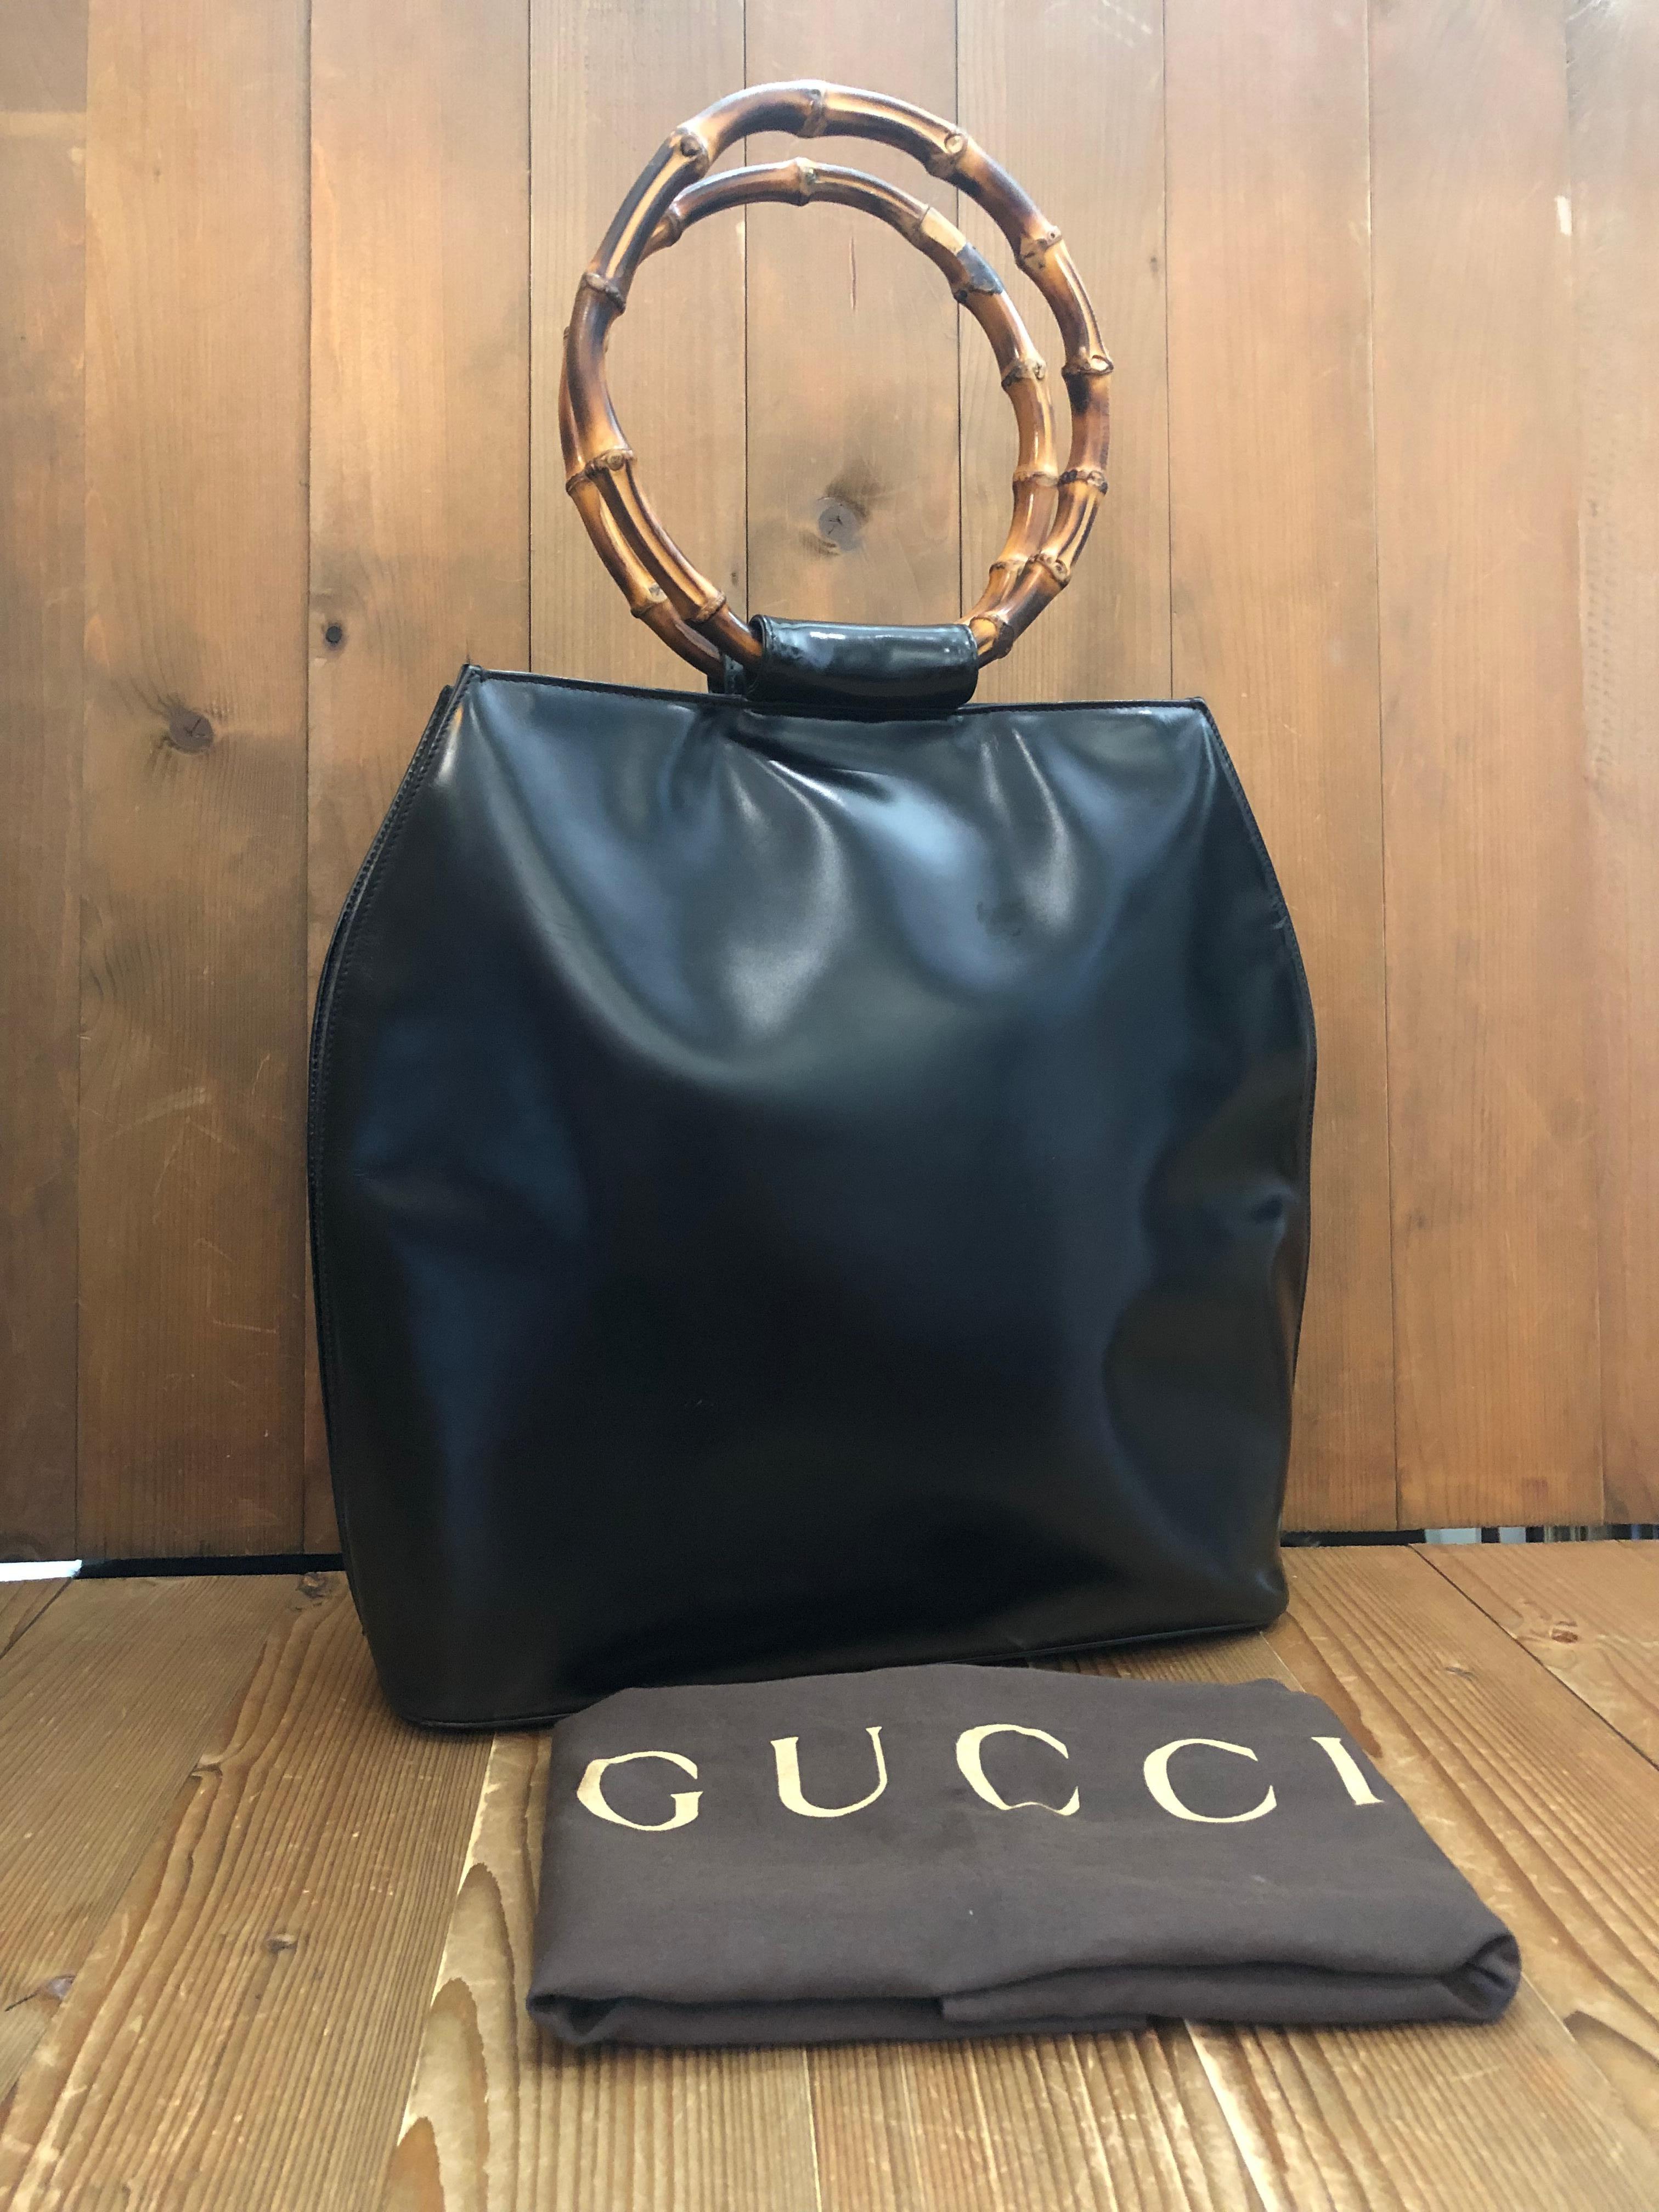 This vintage GUCCI top handle shoulder tote bag is crafted of polished calfskin leather in black featuring two massive bamboo ring handles. Top magnetic snap closure opens to a new interior in black featuring a zippered pocket. Made in Italy.